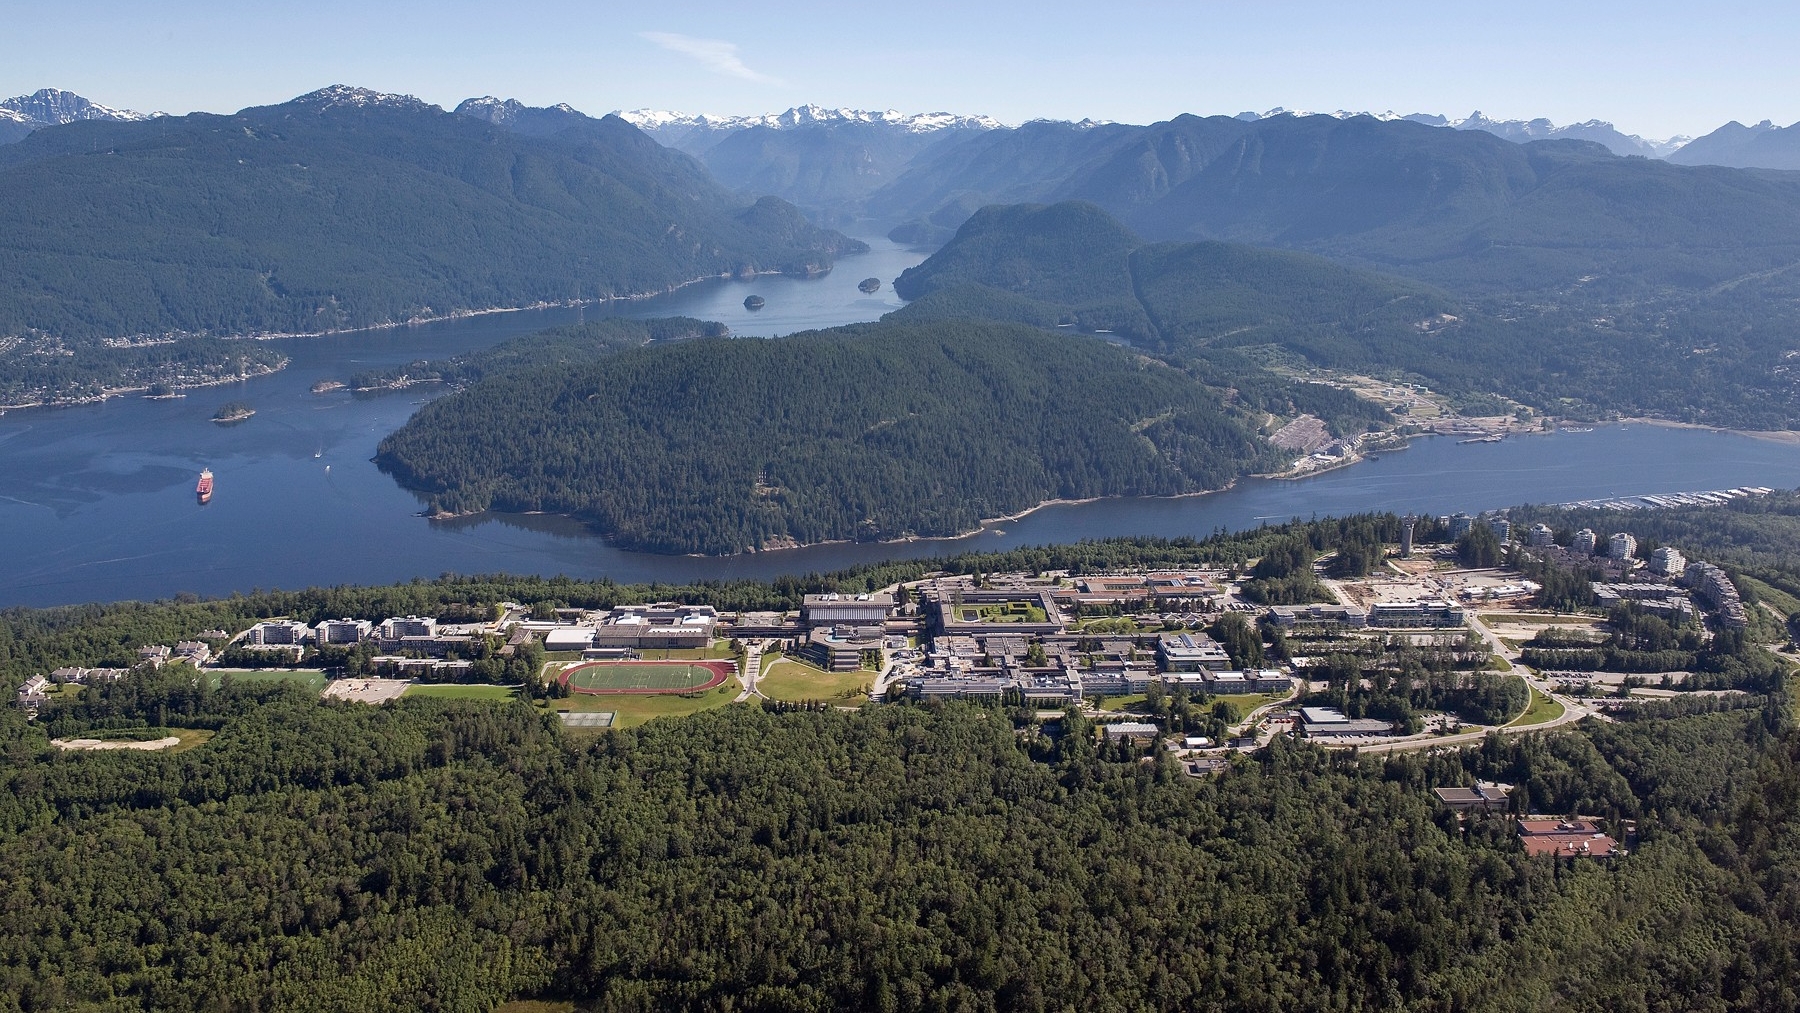 Aerial view of Burnaby Mountain, which in Sḵwx̱wú7mesh (Squamish) is known as Lhuḵw’lkuḵw’áyten, meaning "where the bark gets pe[e]led in the spring."